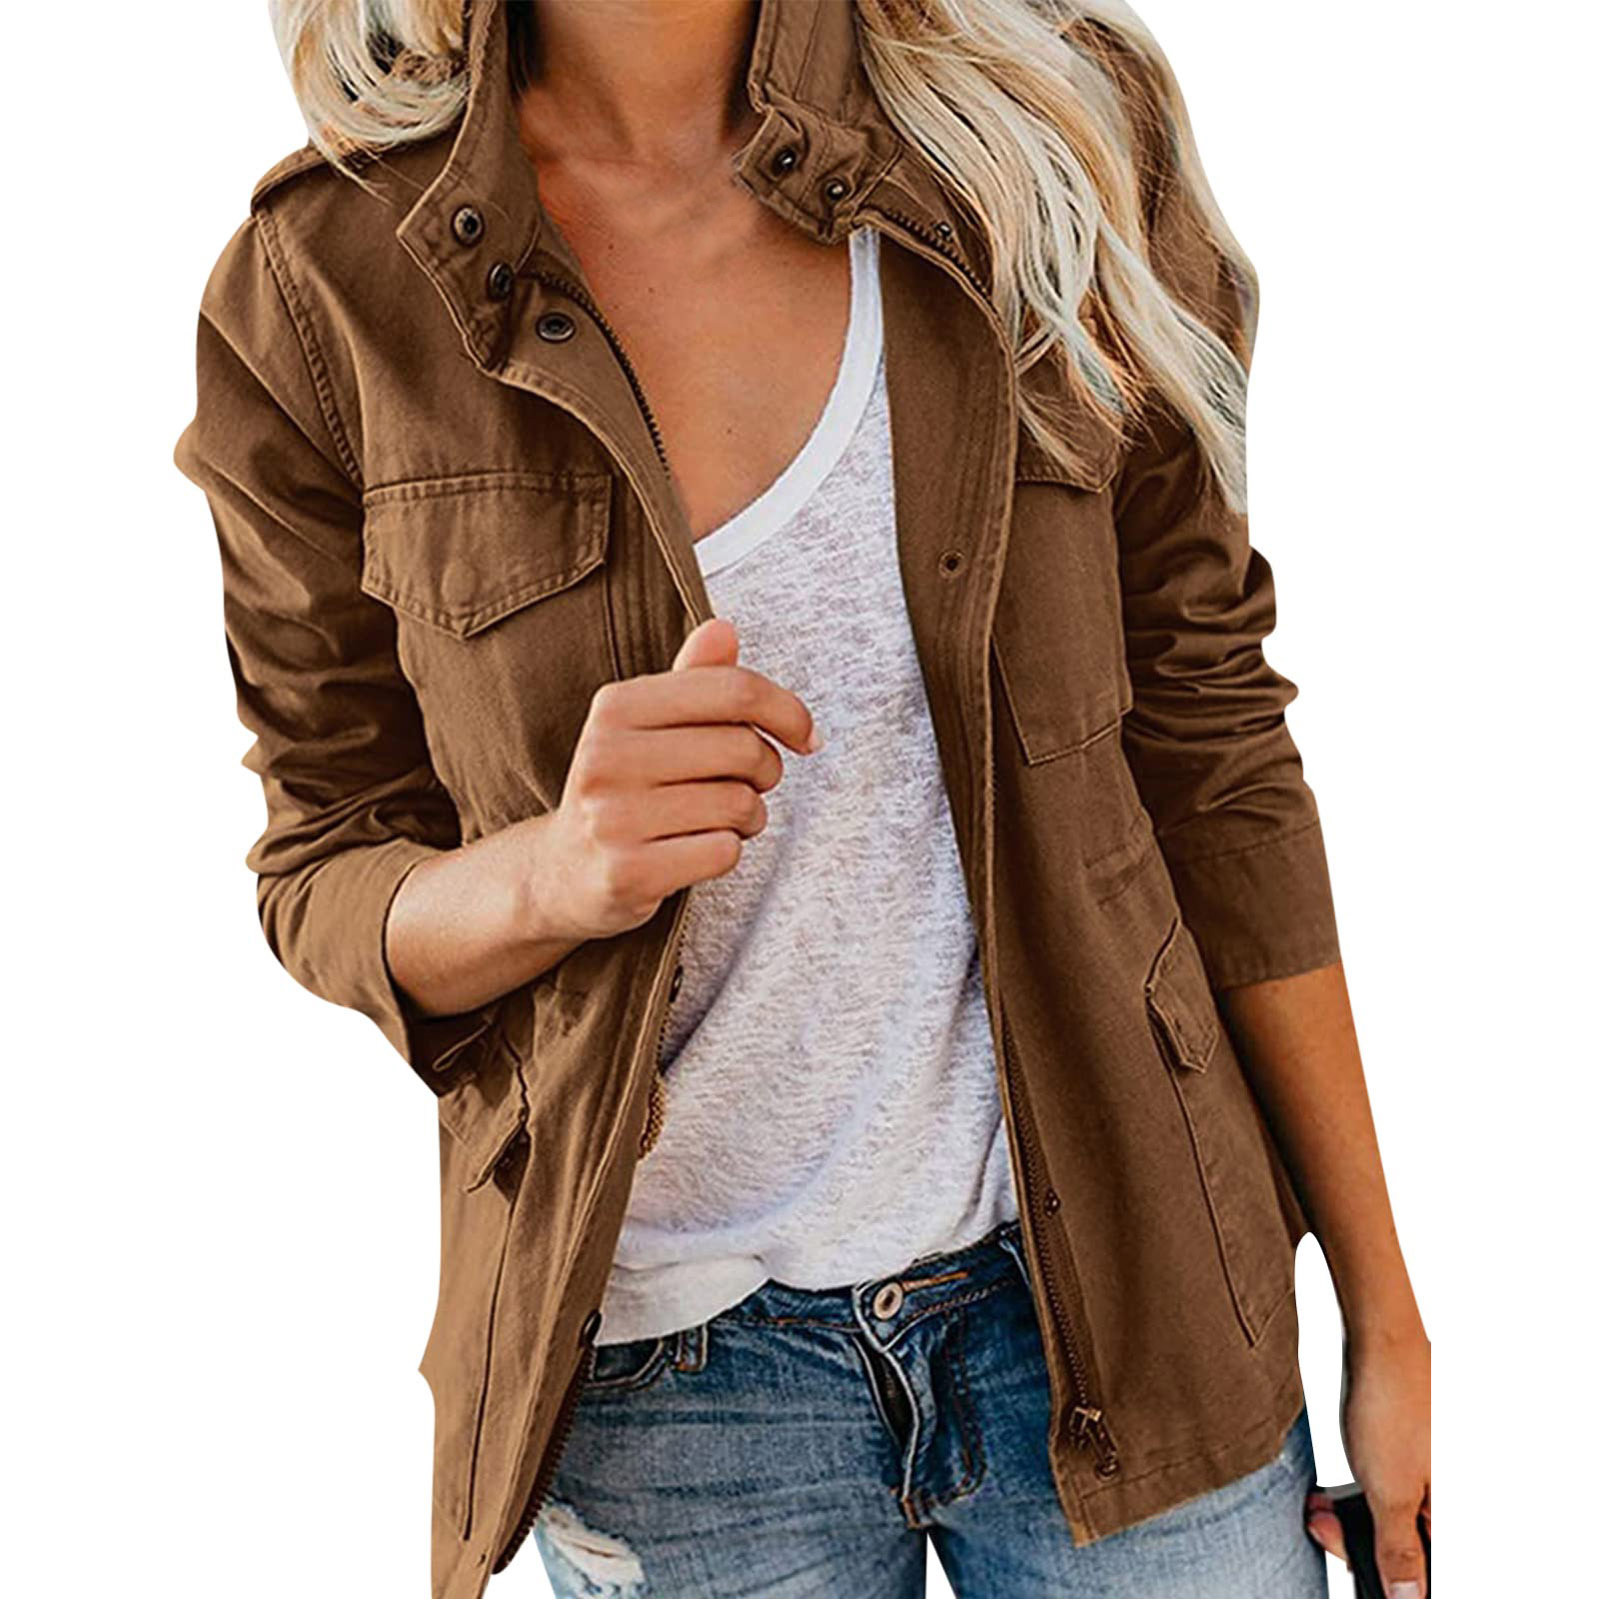 Women's Plus Size Jacket Daily Fall Regular Coat Regular Fit Breathable Casual Jacket Long Sleeve Solid Color Quilted Coat Heated Vest with Collar Dressy Womens Coats Winter Tennis Jacket Women Women - image 1 of 1